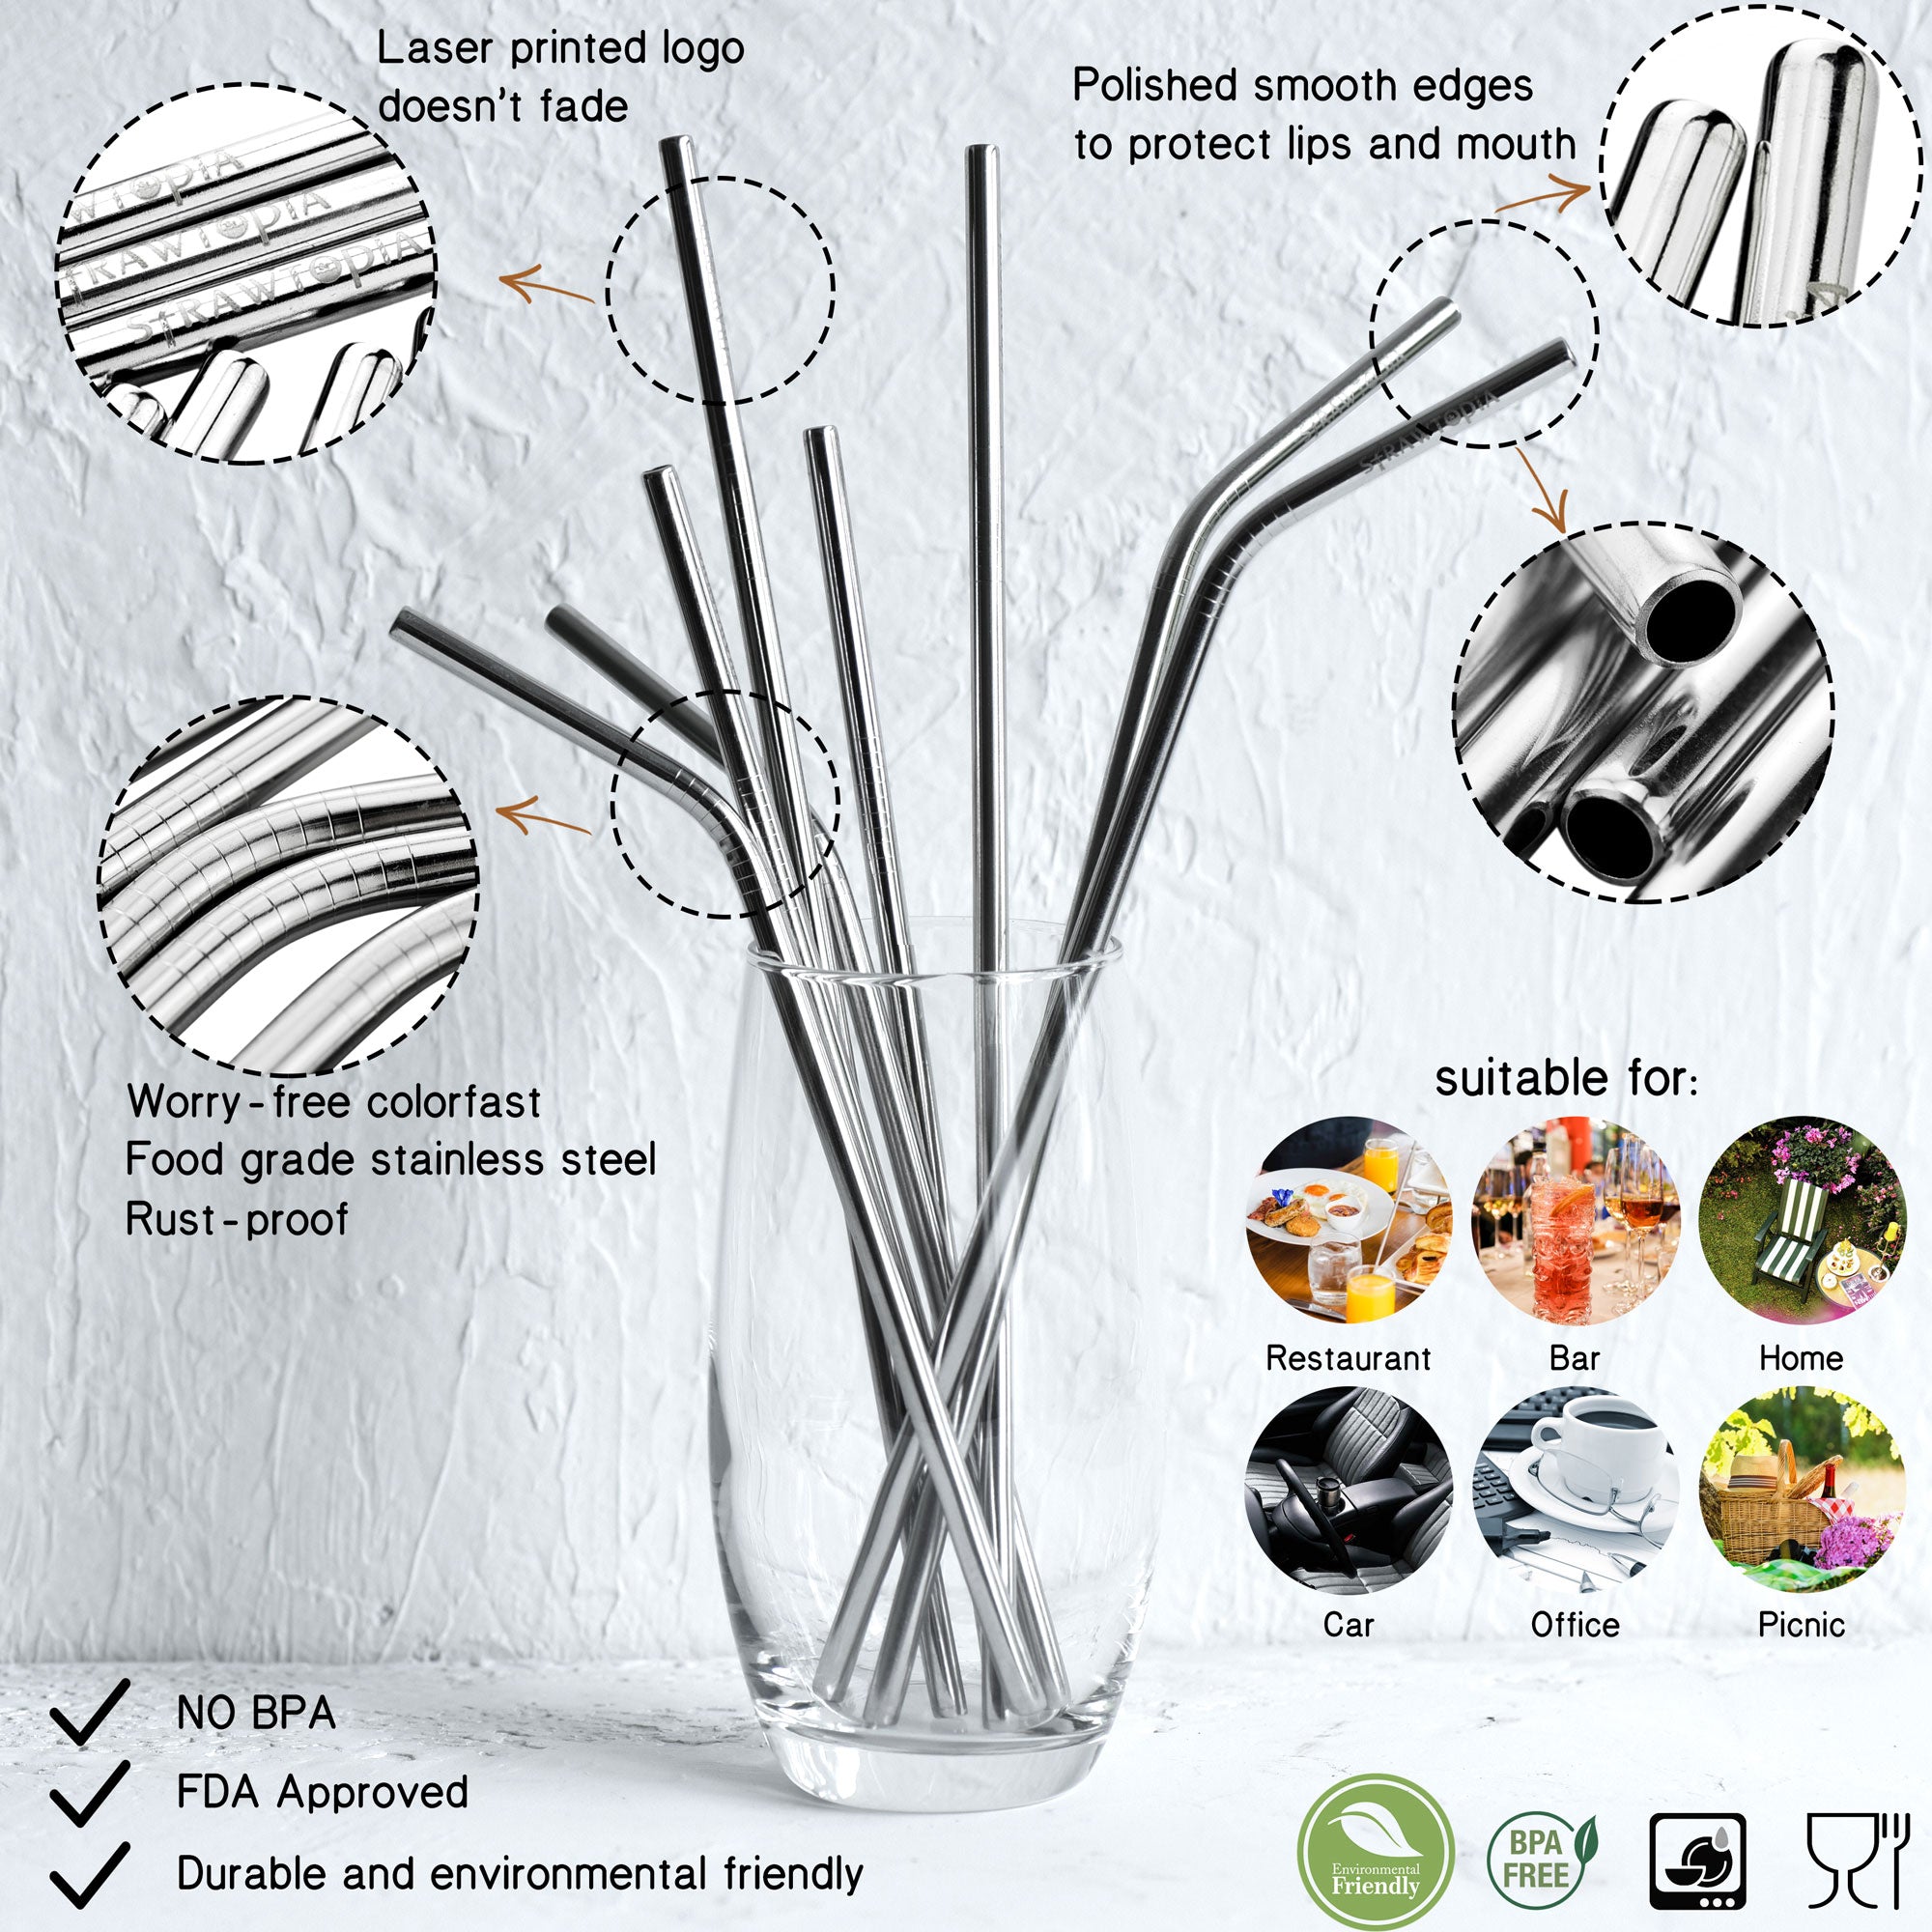 How to Care for Metal Straws - Wowe Lifestyle